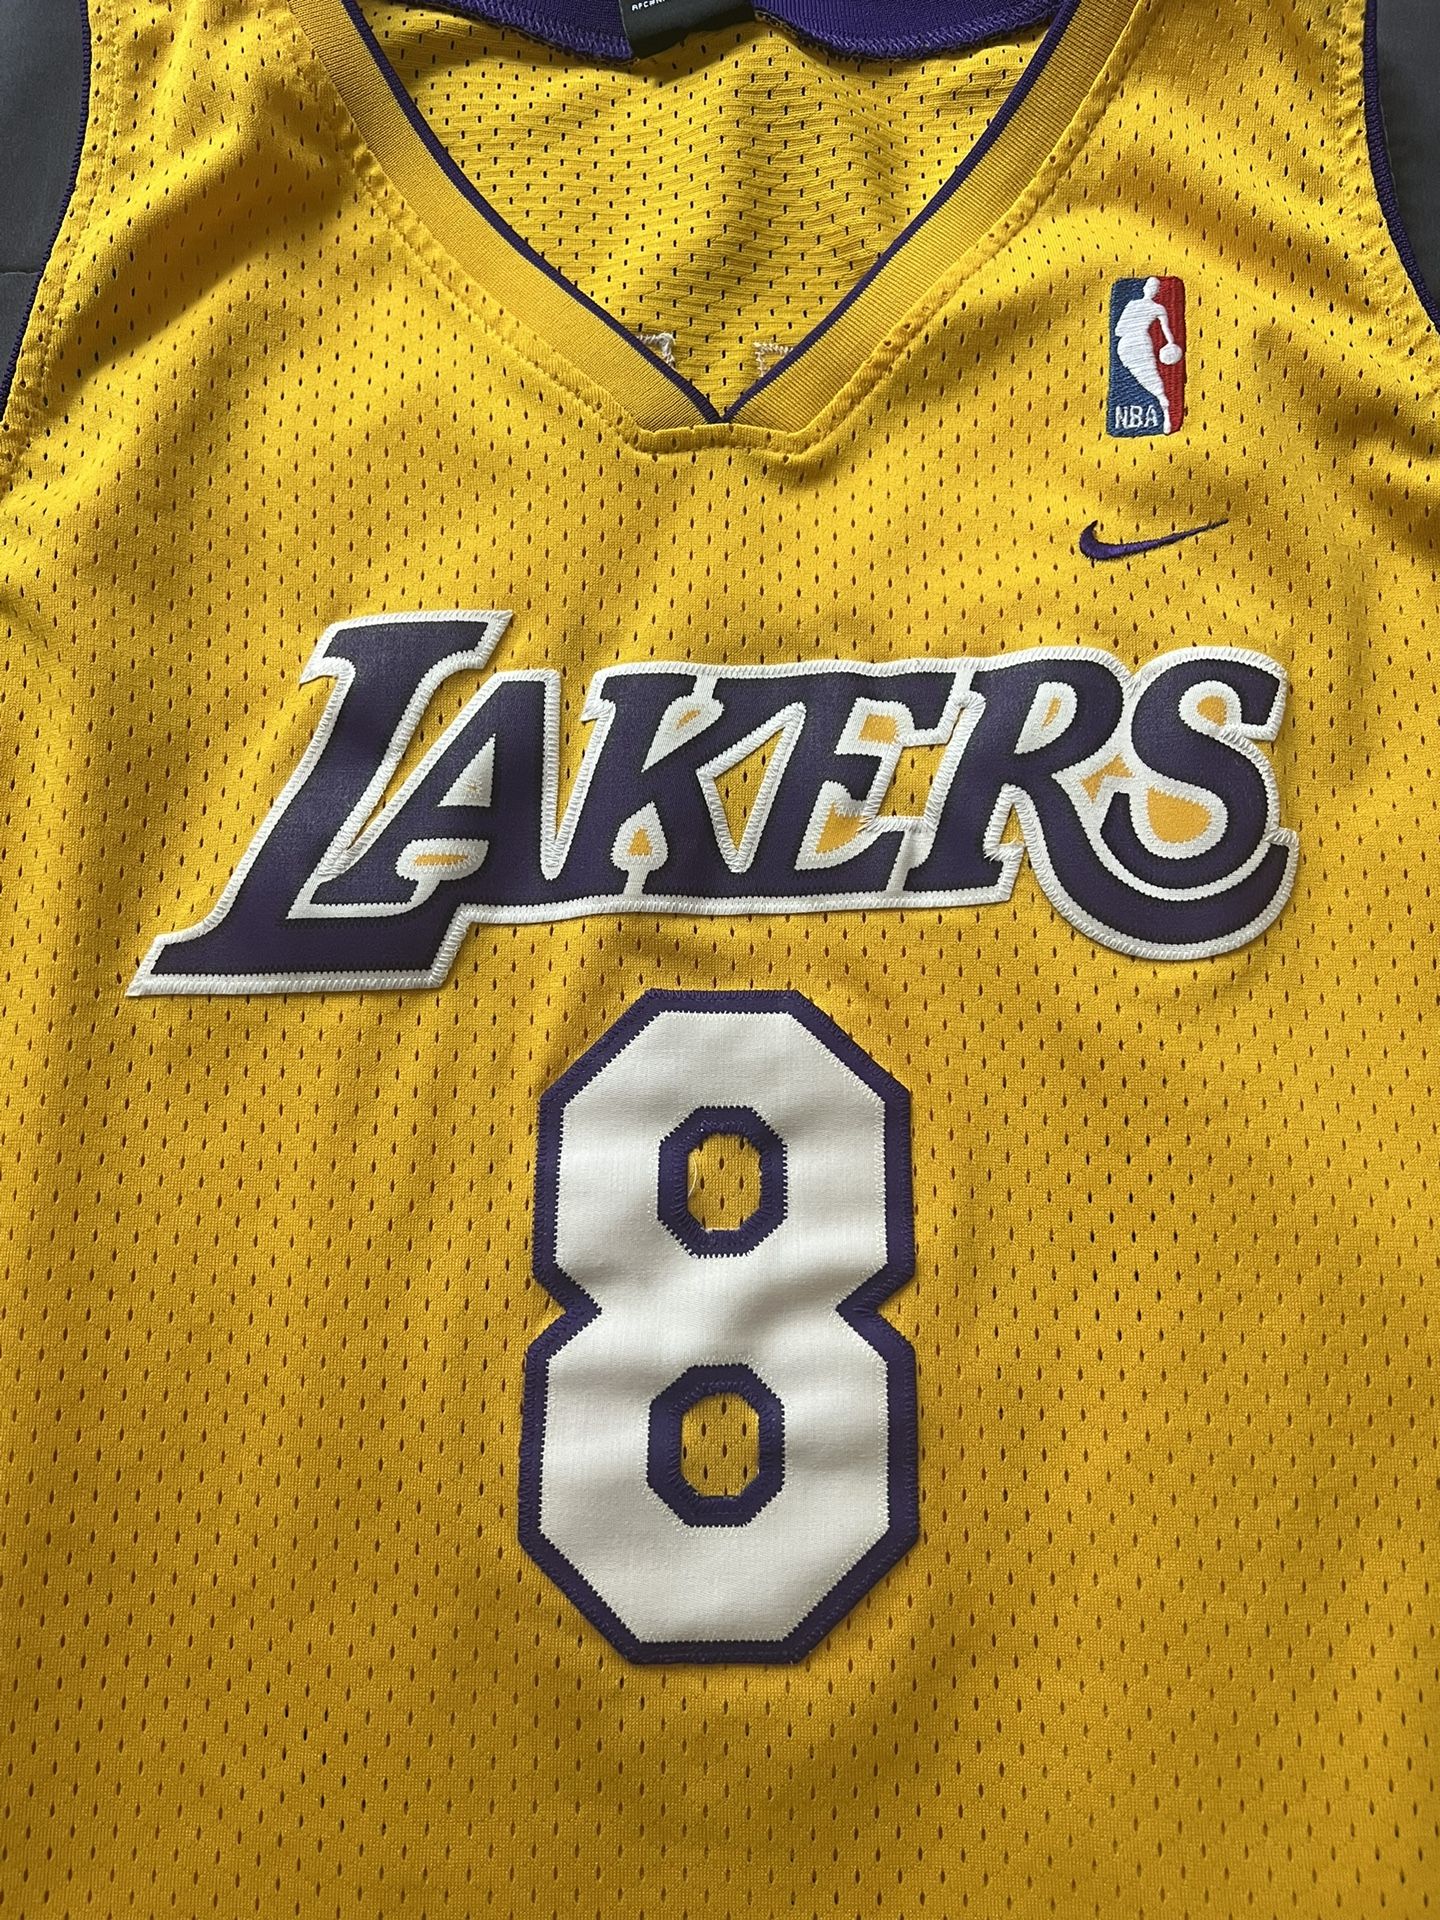 Authentic Kobe Bryant Jersey 60th Anniversary 07-08 for Sale in Buena Park,  CA - OfferUp